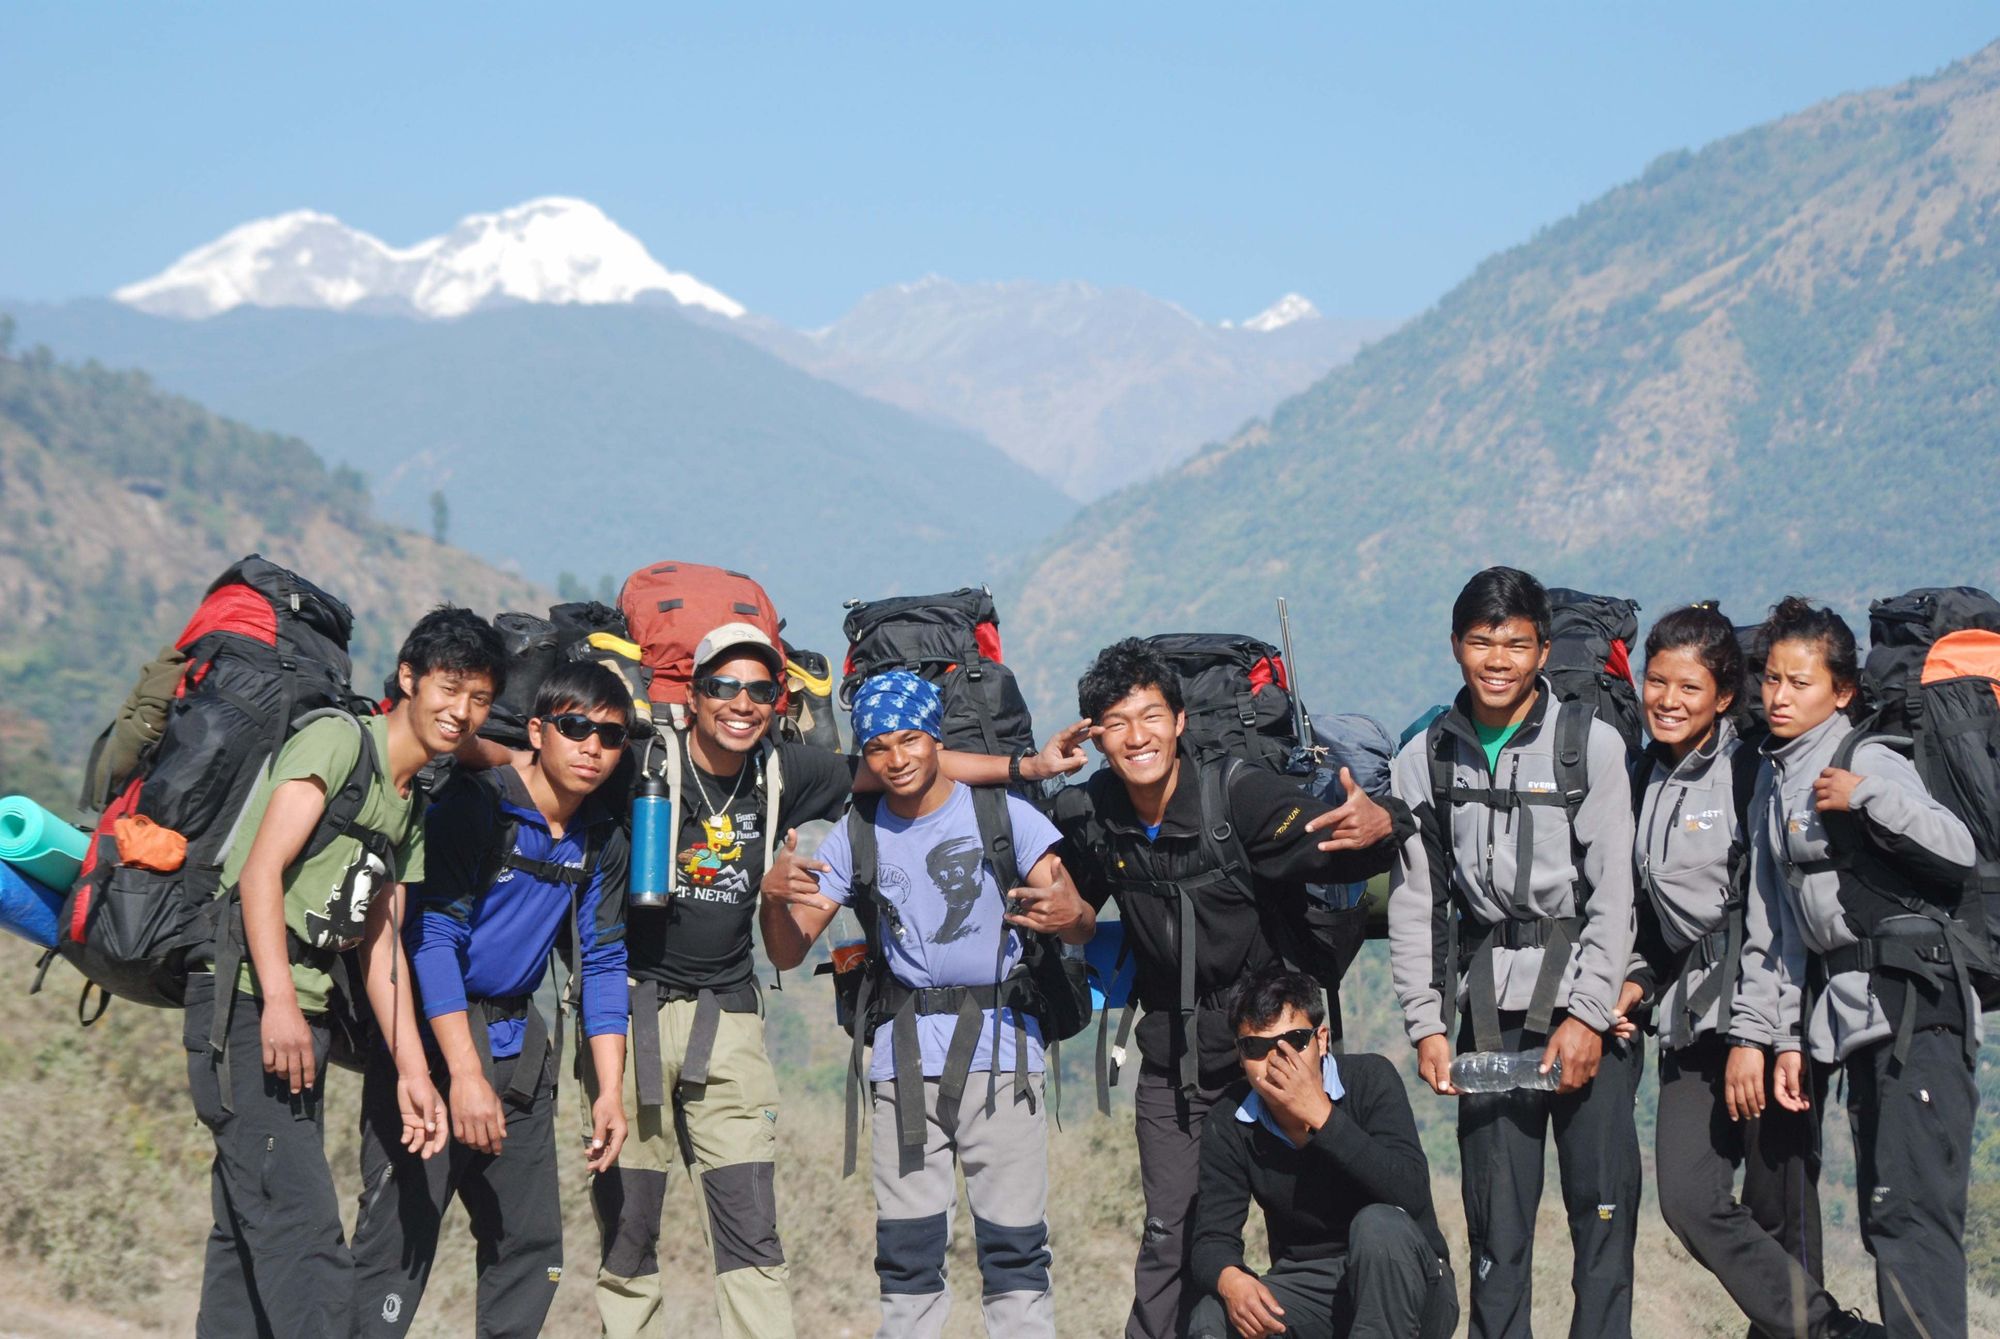 The Guide Giving Children a Positive Future in the Himalayas